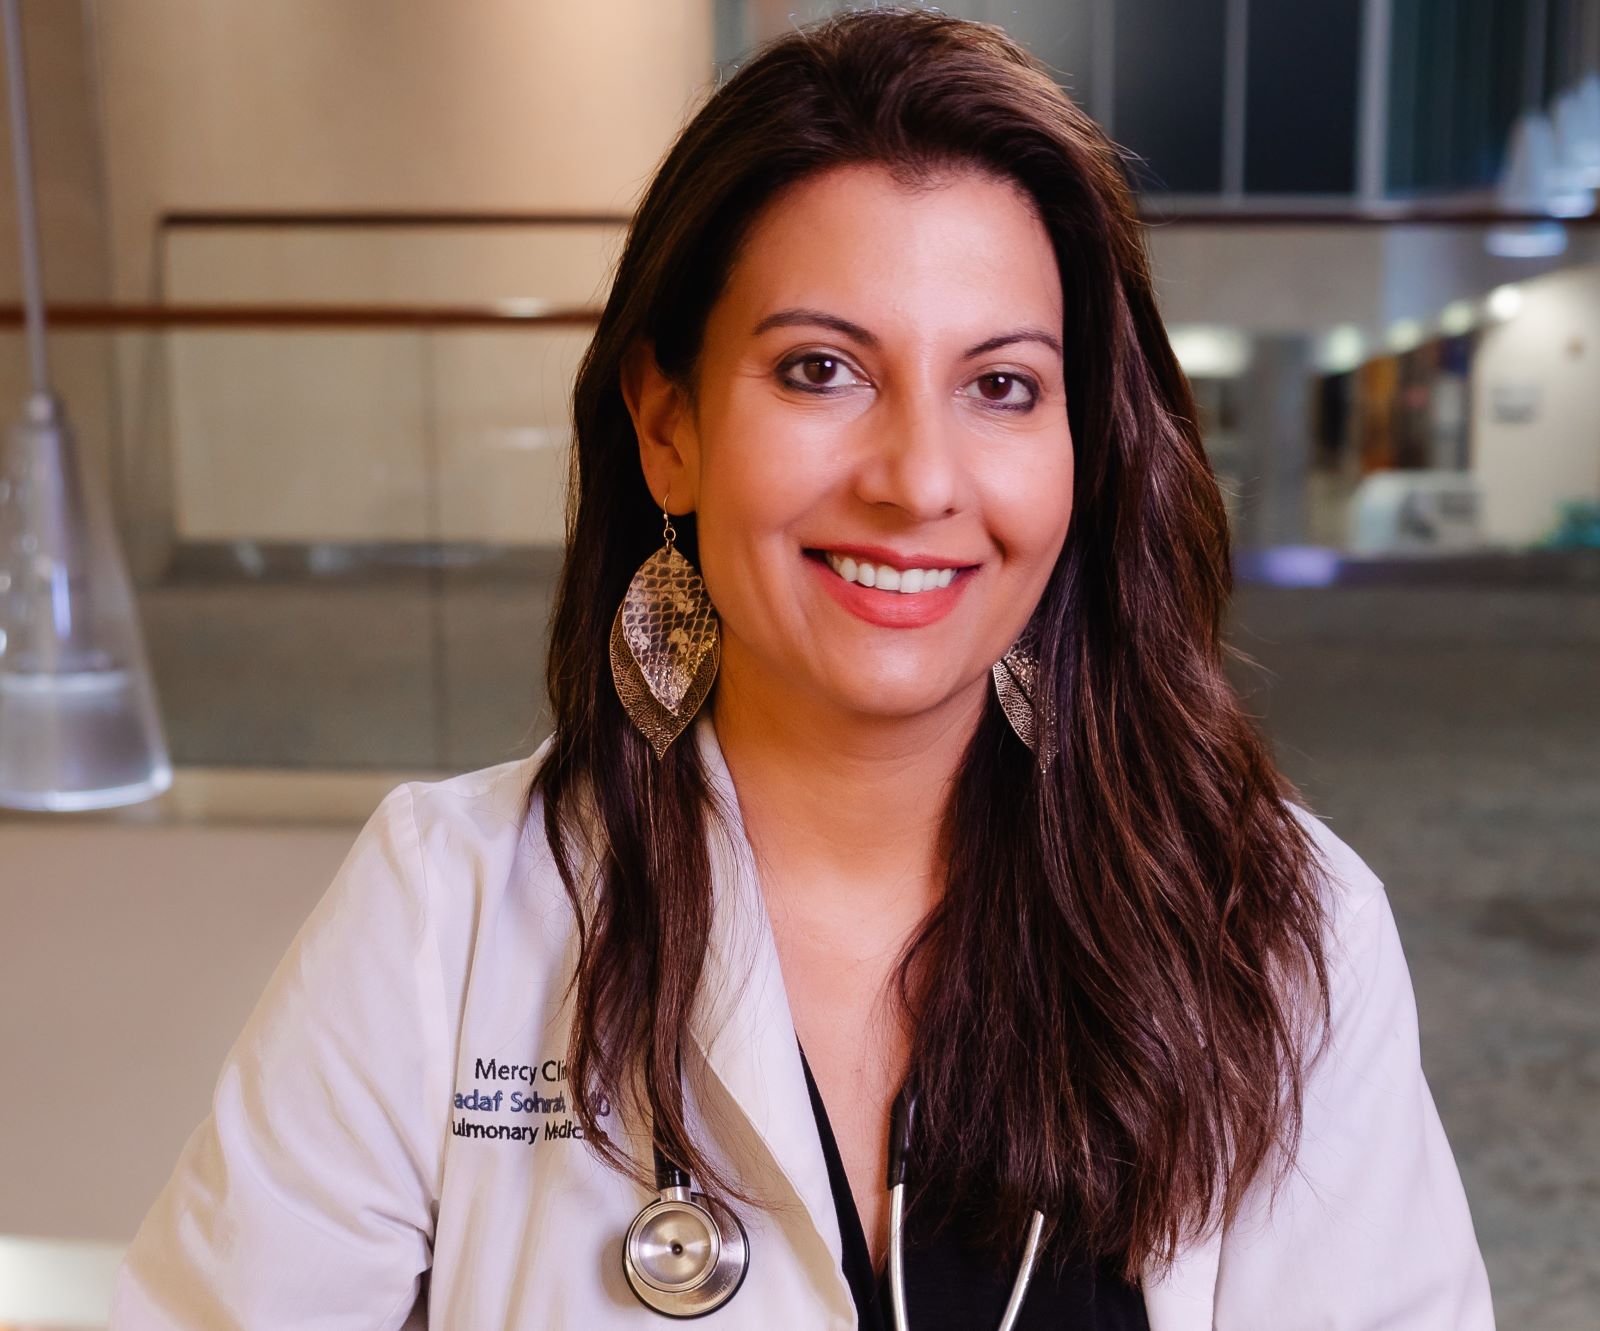 Dr. Sadaf Sohrab was promoted to Chief Medical Officer of Mercy Springfield Communities, according to an April 12 company press release. (Photo by Mercy)